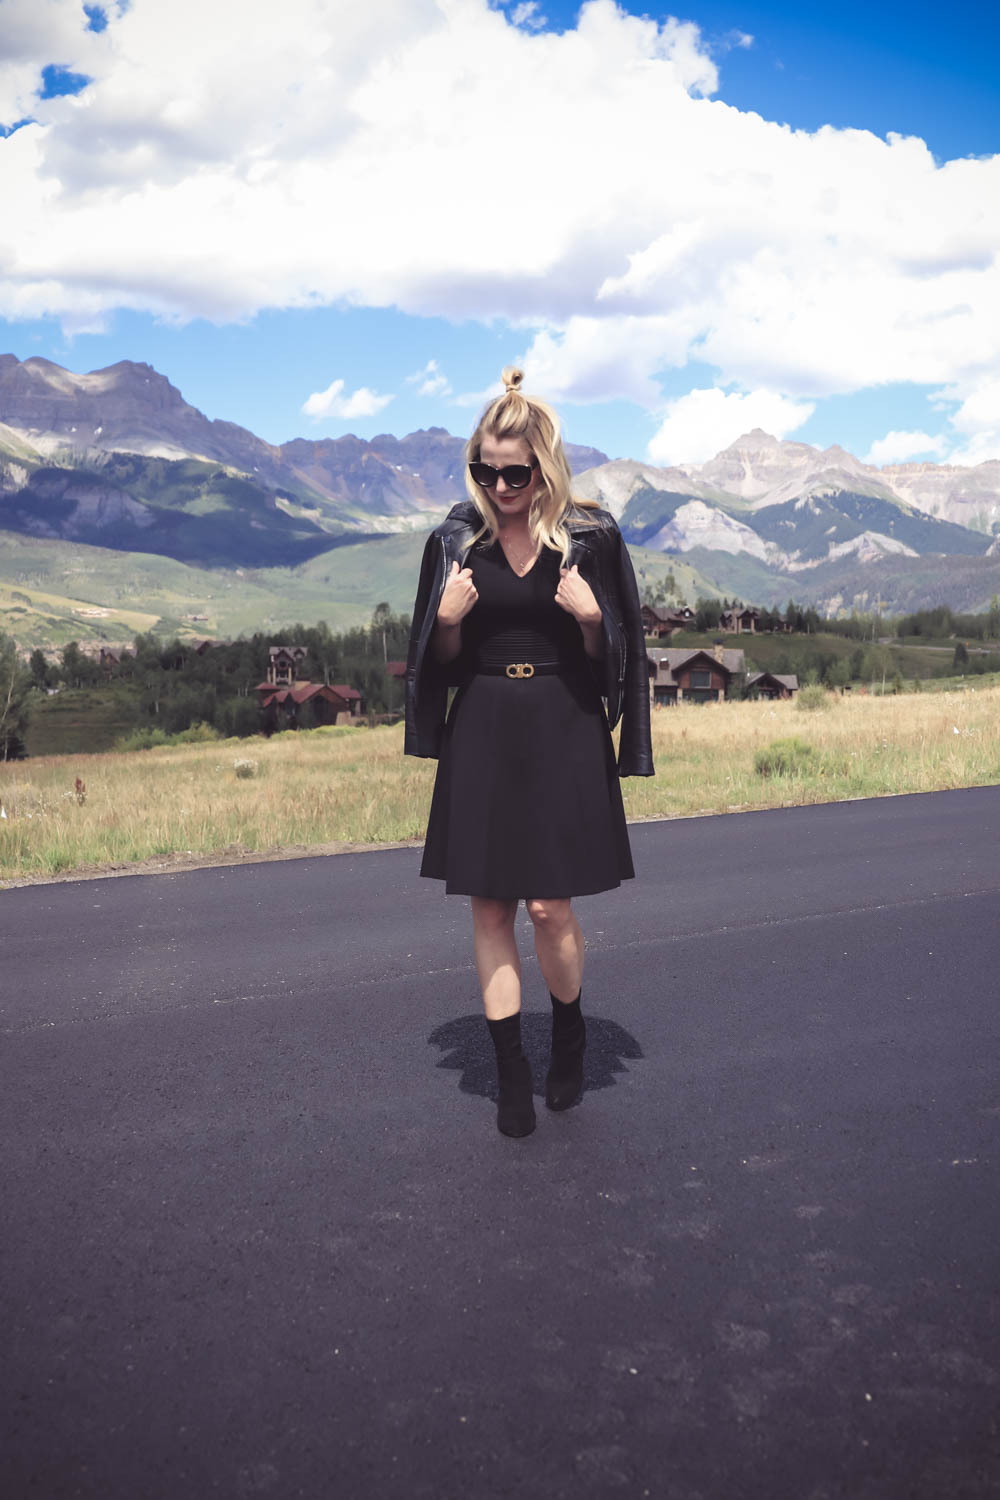 Wear Now, Wear Later, little black dress fit and flare by Eliza J, styled with black ankle booties, a black leather moto jacket, and a salvatore ferragamo belt